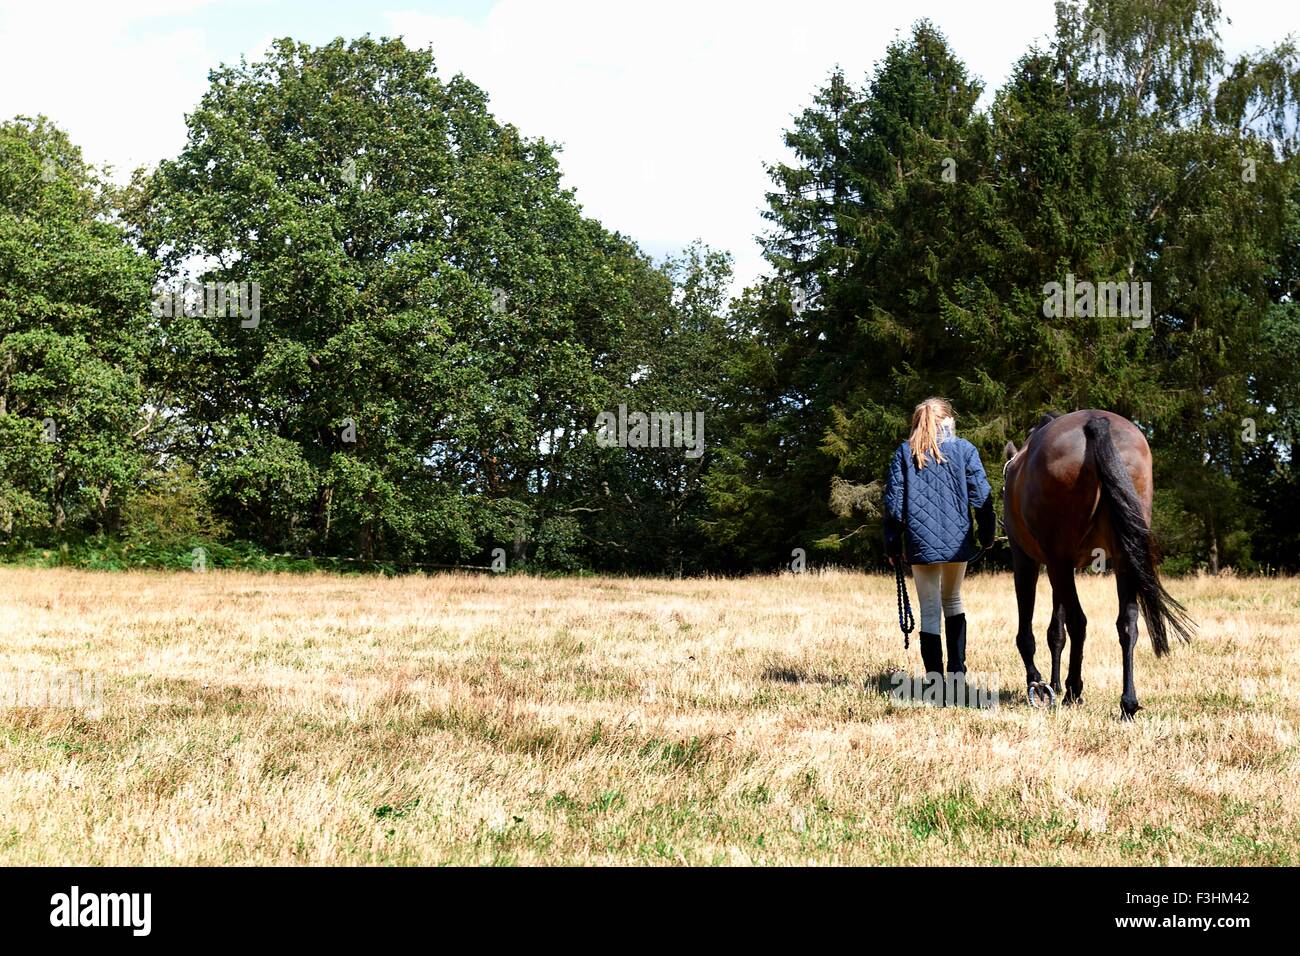 Rear view of girl leading horse in field Stock Photo